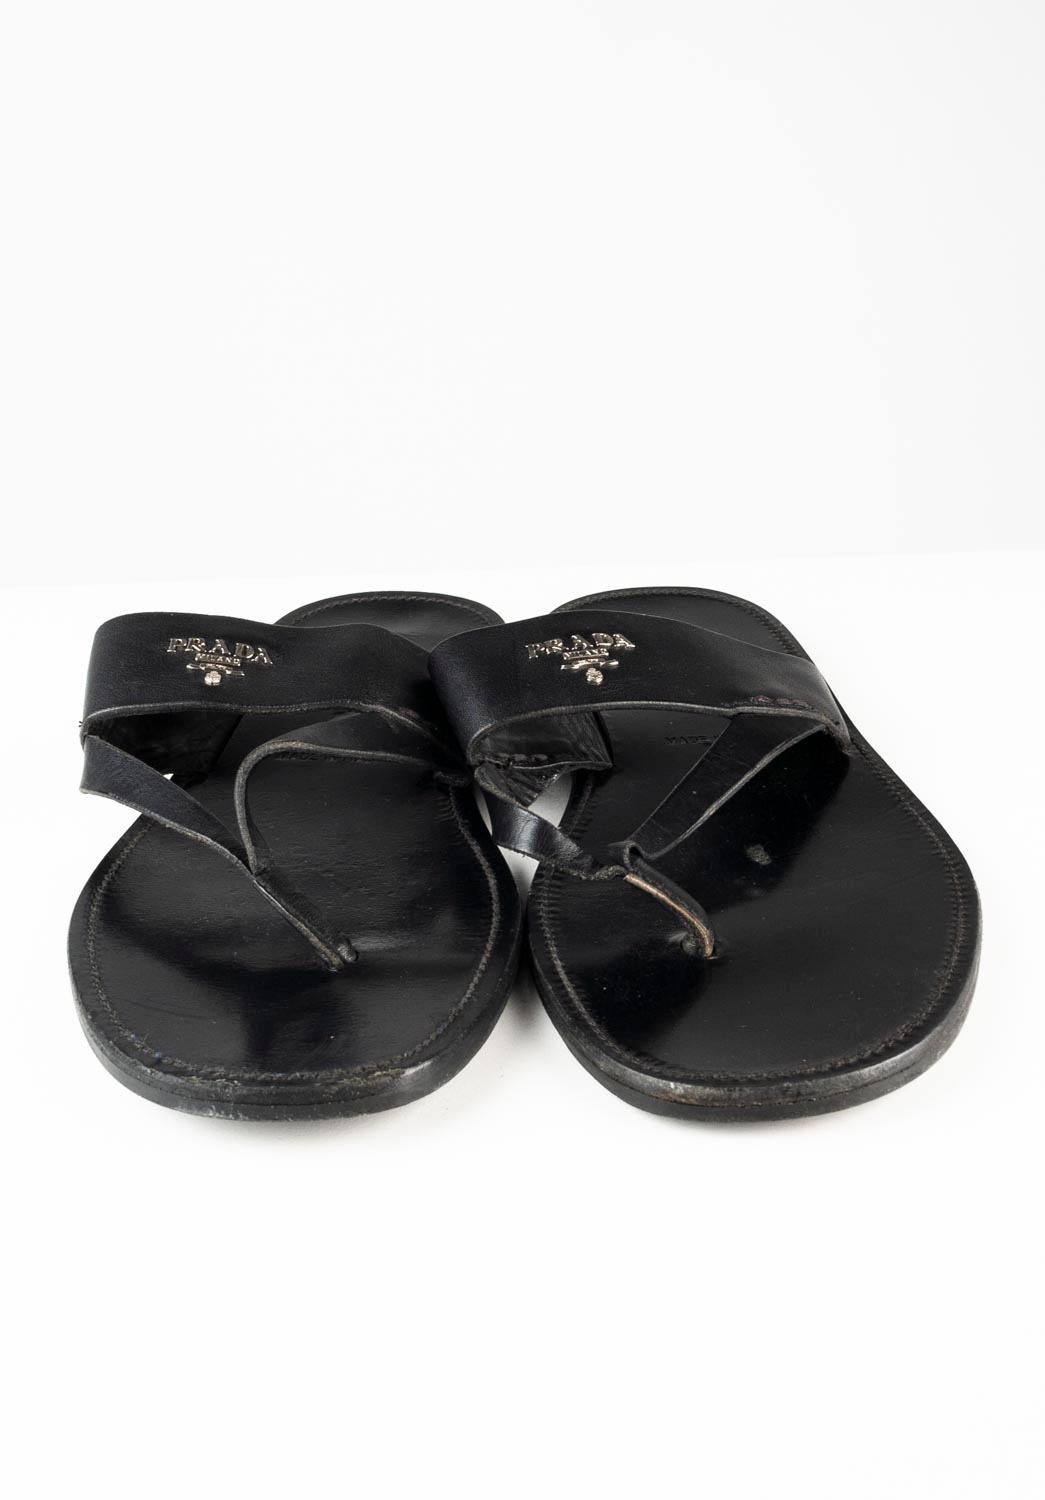 100% genuine Prada Men Leather Sandals with dust bag, S614 
Color: black
(An actual color may a bit vary due to individual computer screen interpretation)
Material: leather
Tag size: UK7, USA8, EUR41
These shoes are great quality item. Rate 8,5 of